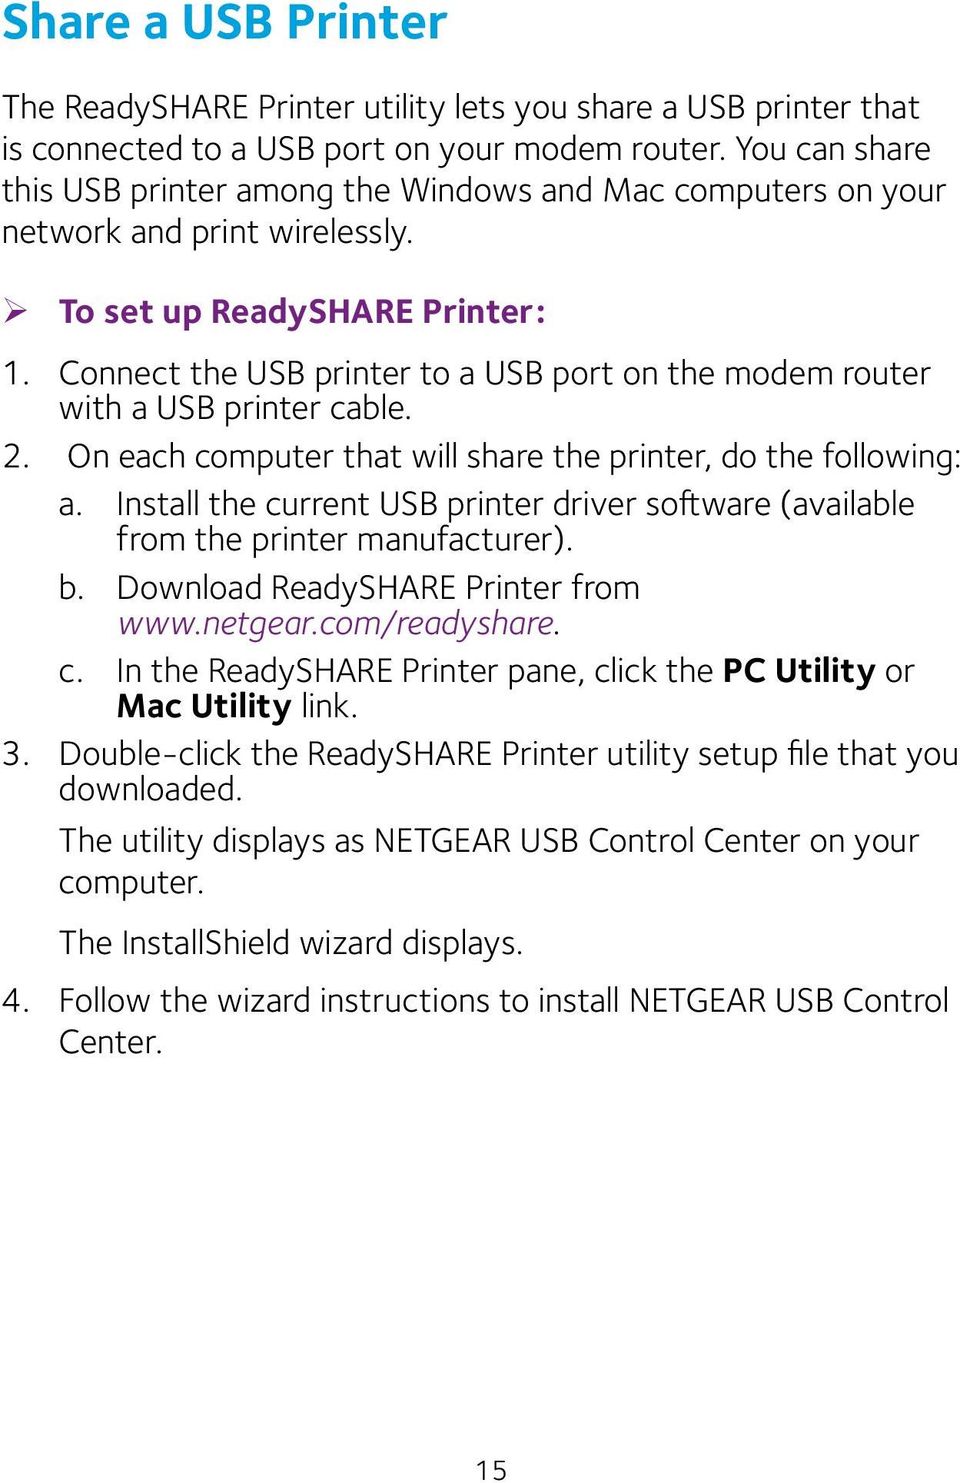 Connect the USB printer to a USB port on the modem router with a USB printer cable. 2. On each computer that will share the printer, do the following: a.